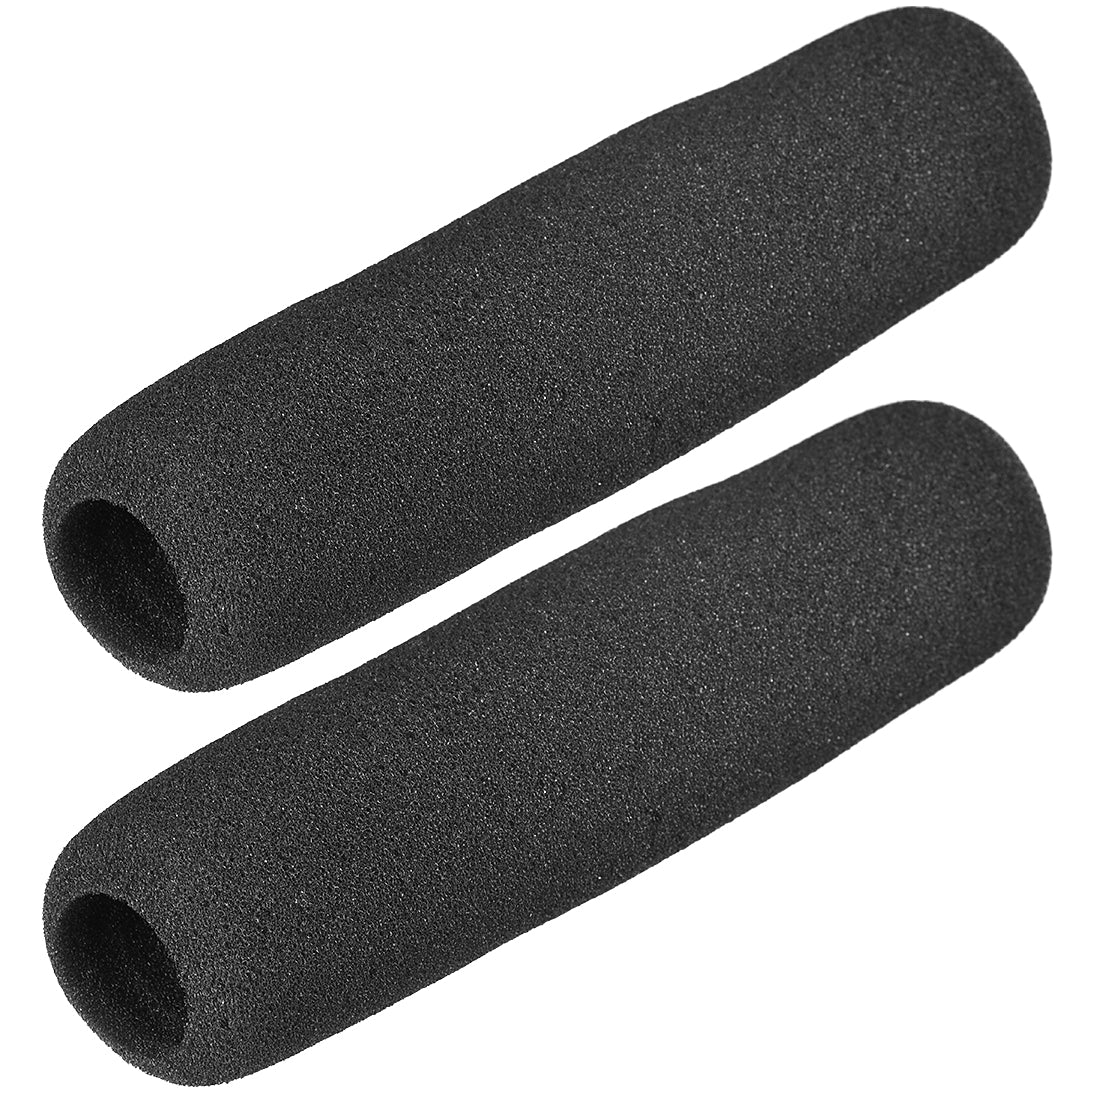 uxcell Uxcell 2PCS Sponge Foam Mic Cover Interview Microphone Windscreen Shield Protection Black 160mm Long